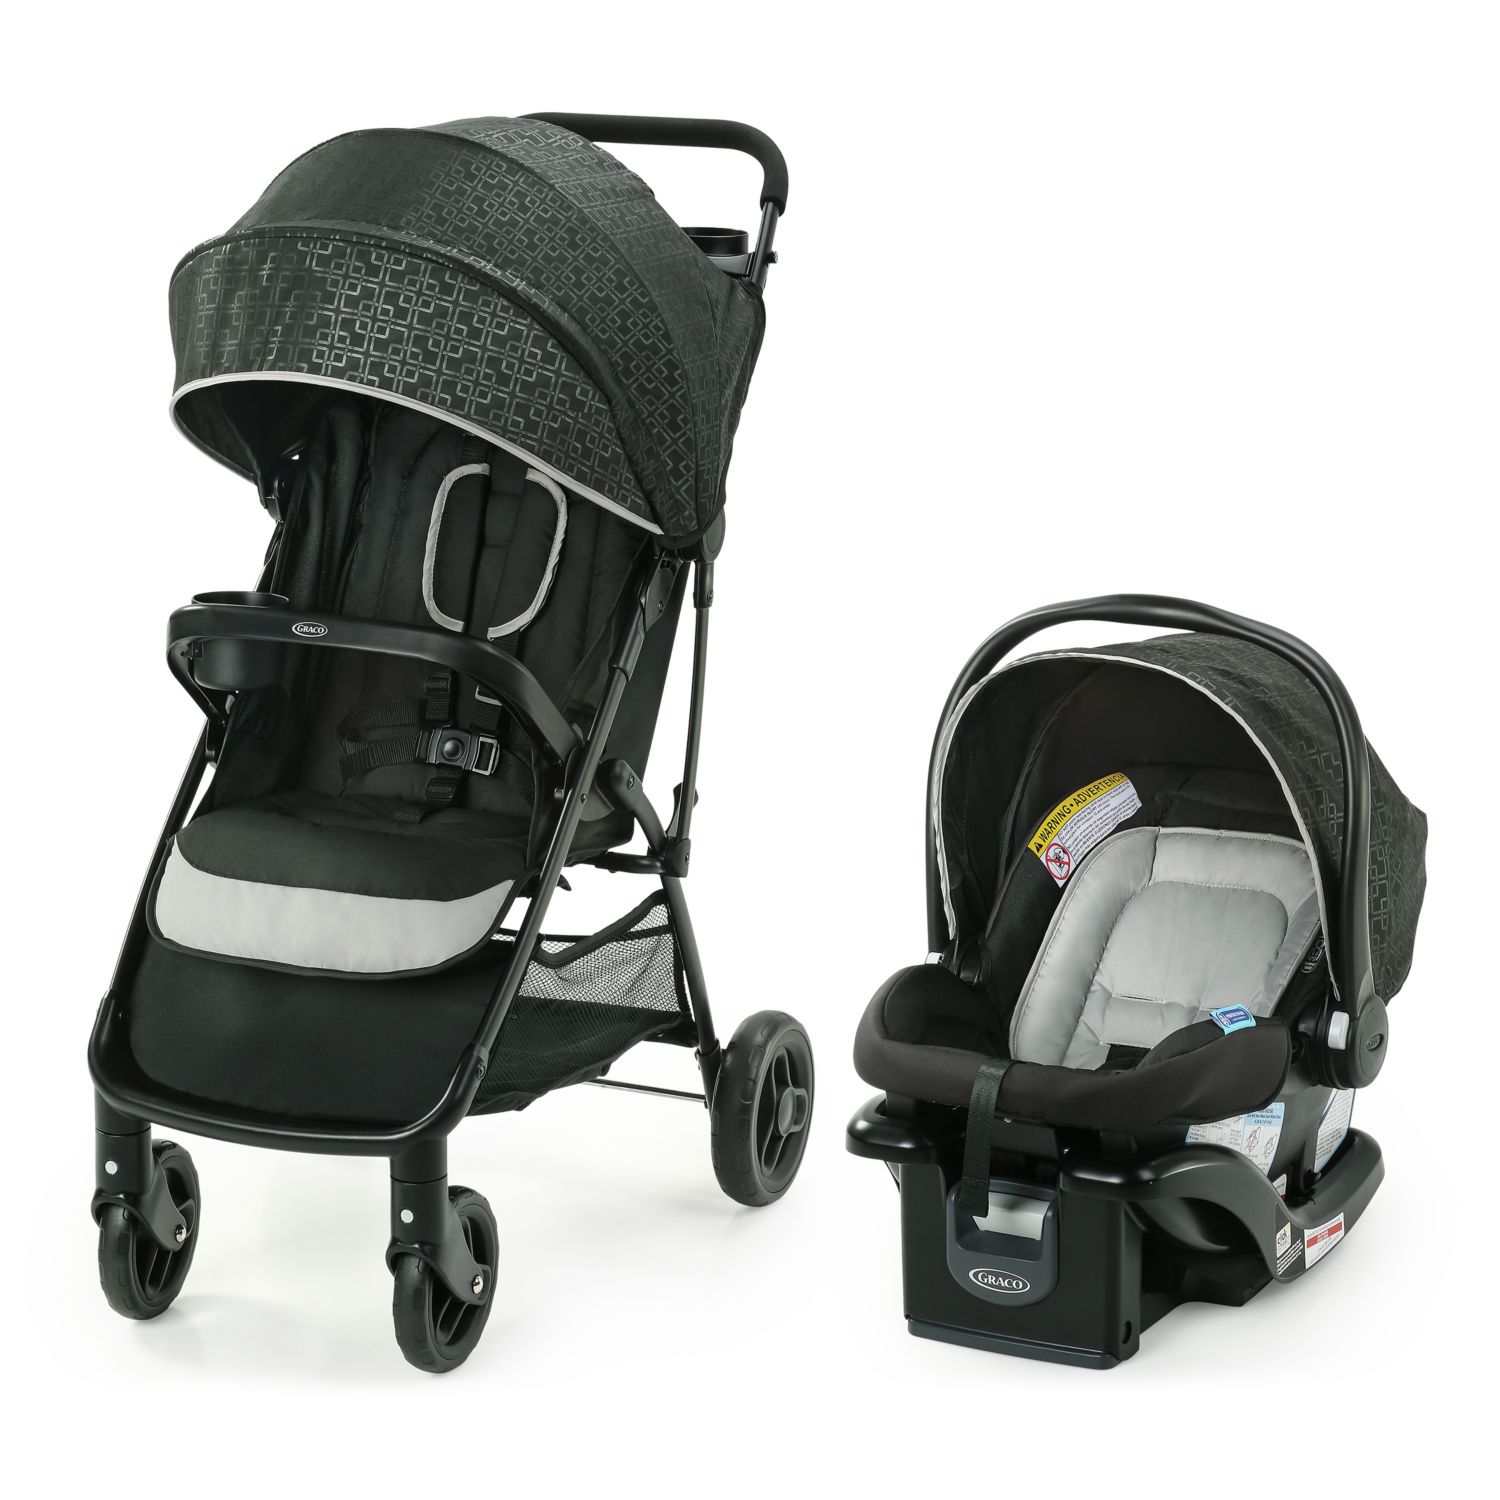 easy ride 5 travel system